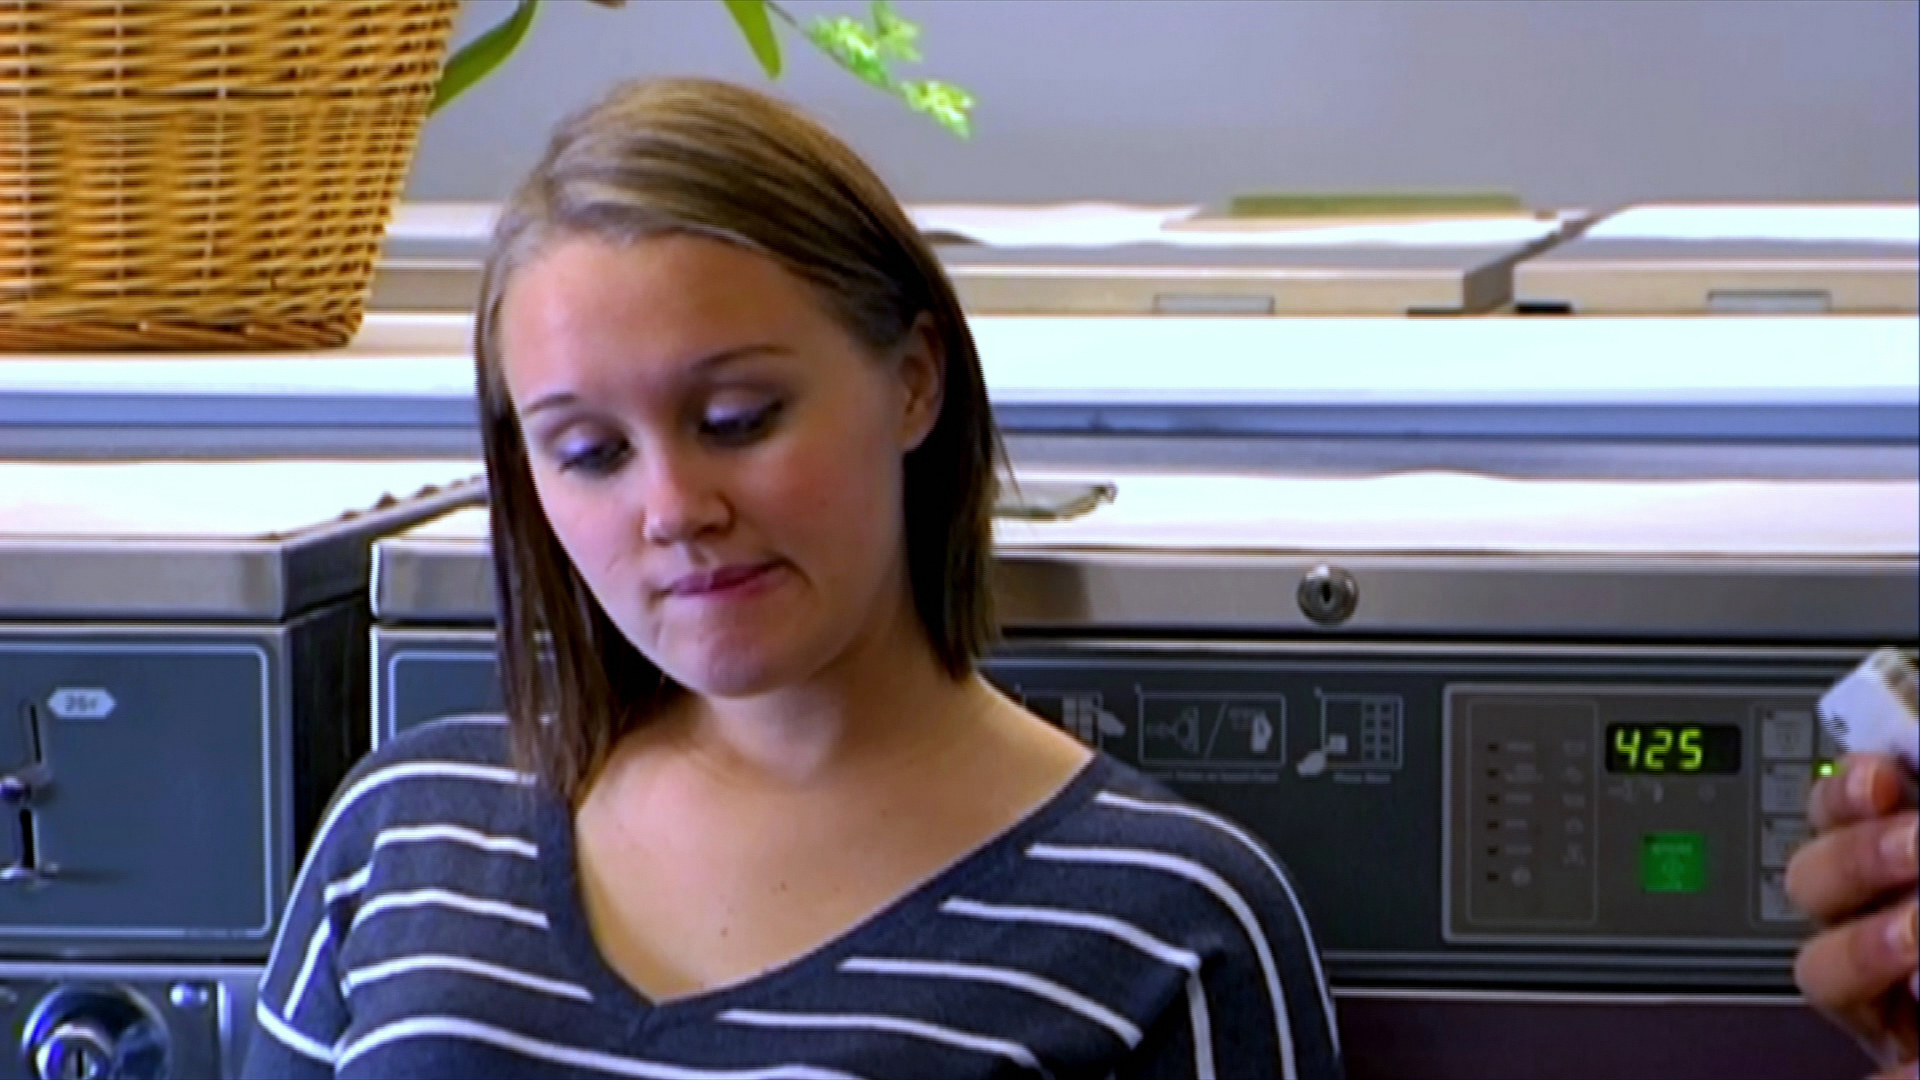 Watch 16 And Pregnant Season 5 Episode 9 16 And Pregnant Jordan Full Show On Paramount Plus 